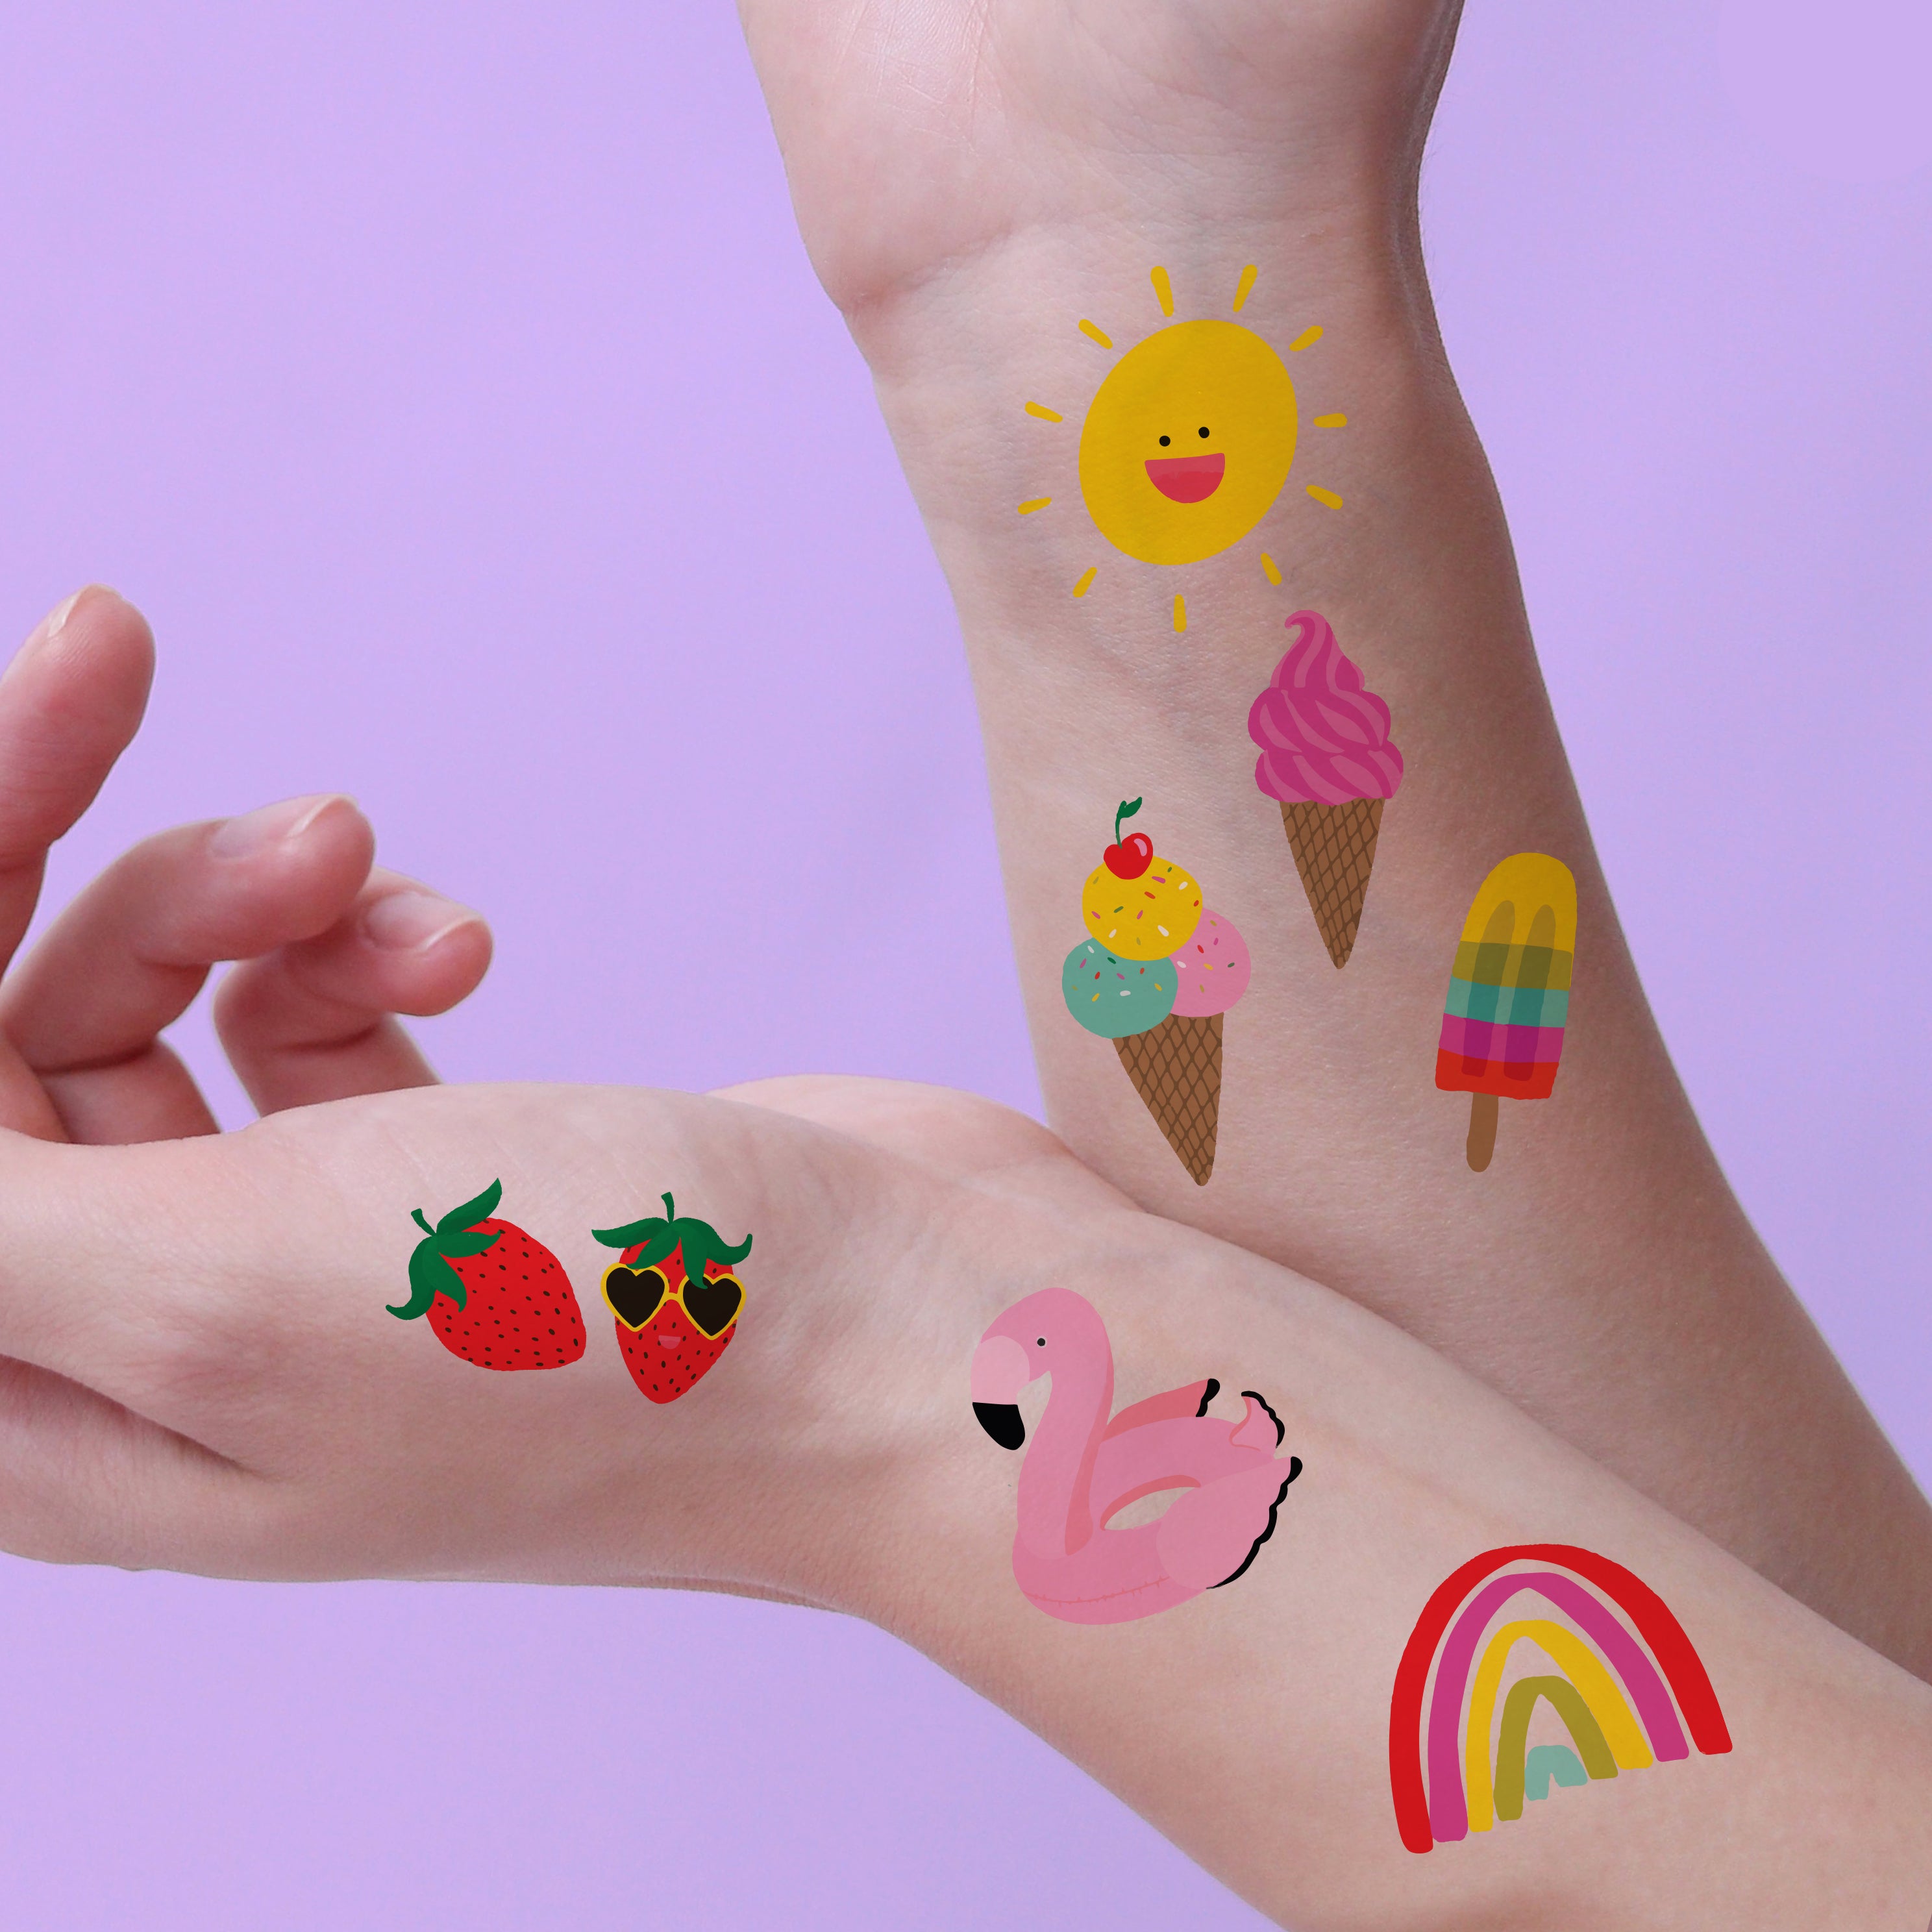 Summer Fun Variety Set' featuring 25 assorted colorful sunny summer days inspired kids tattoos!